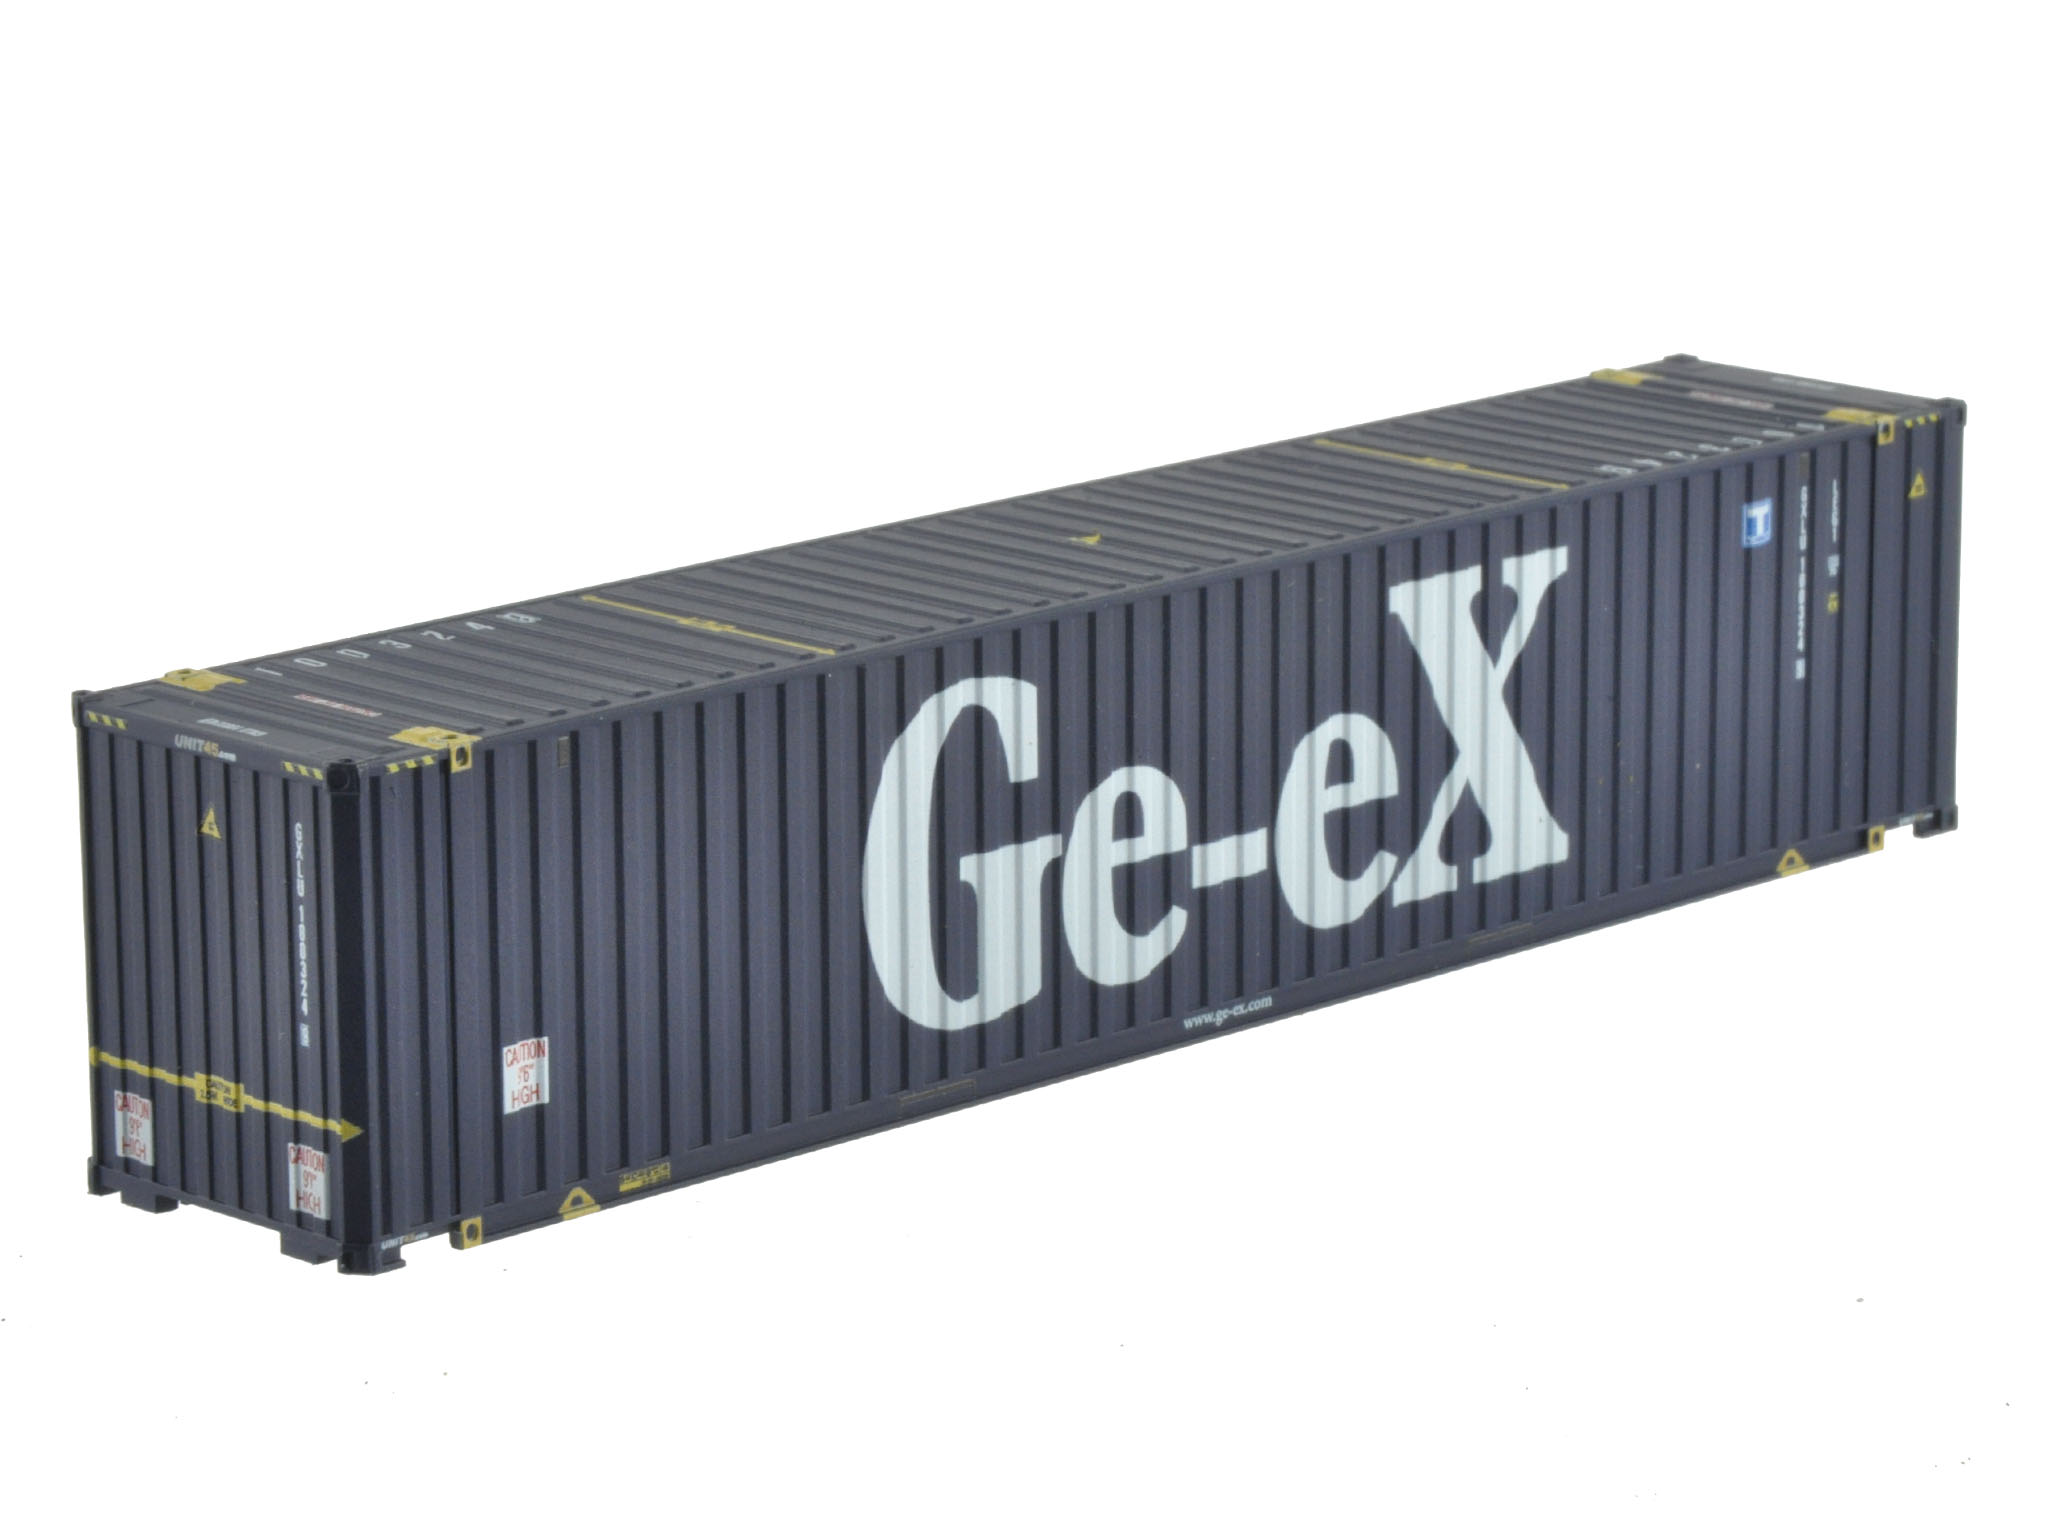 1:87 45´ Container GE-EX WB-A HC (Euro), # GXLU 100324